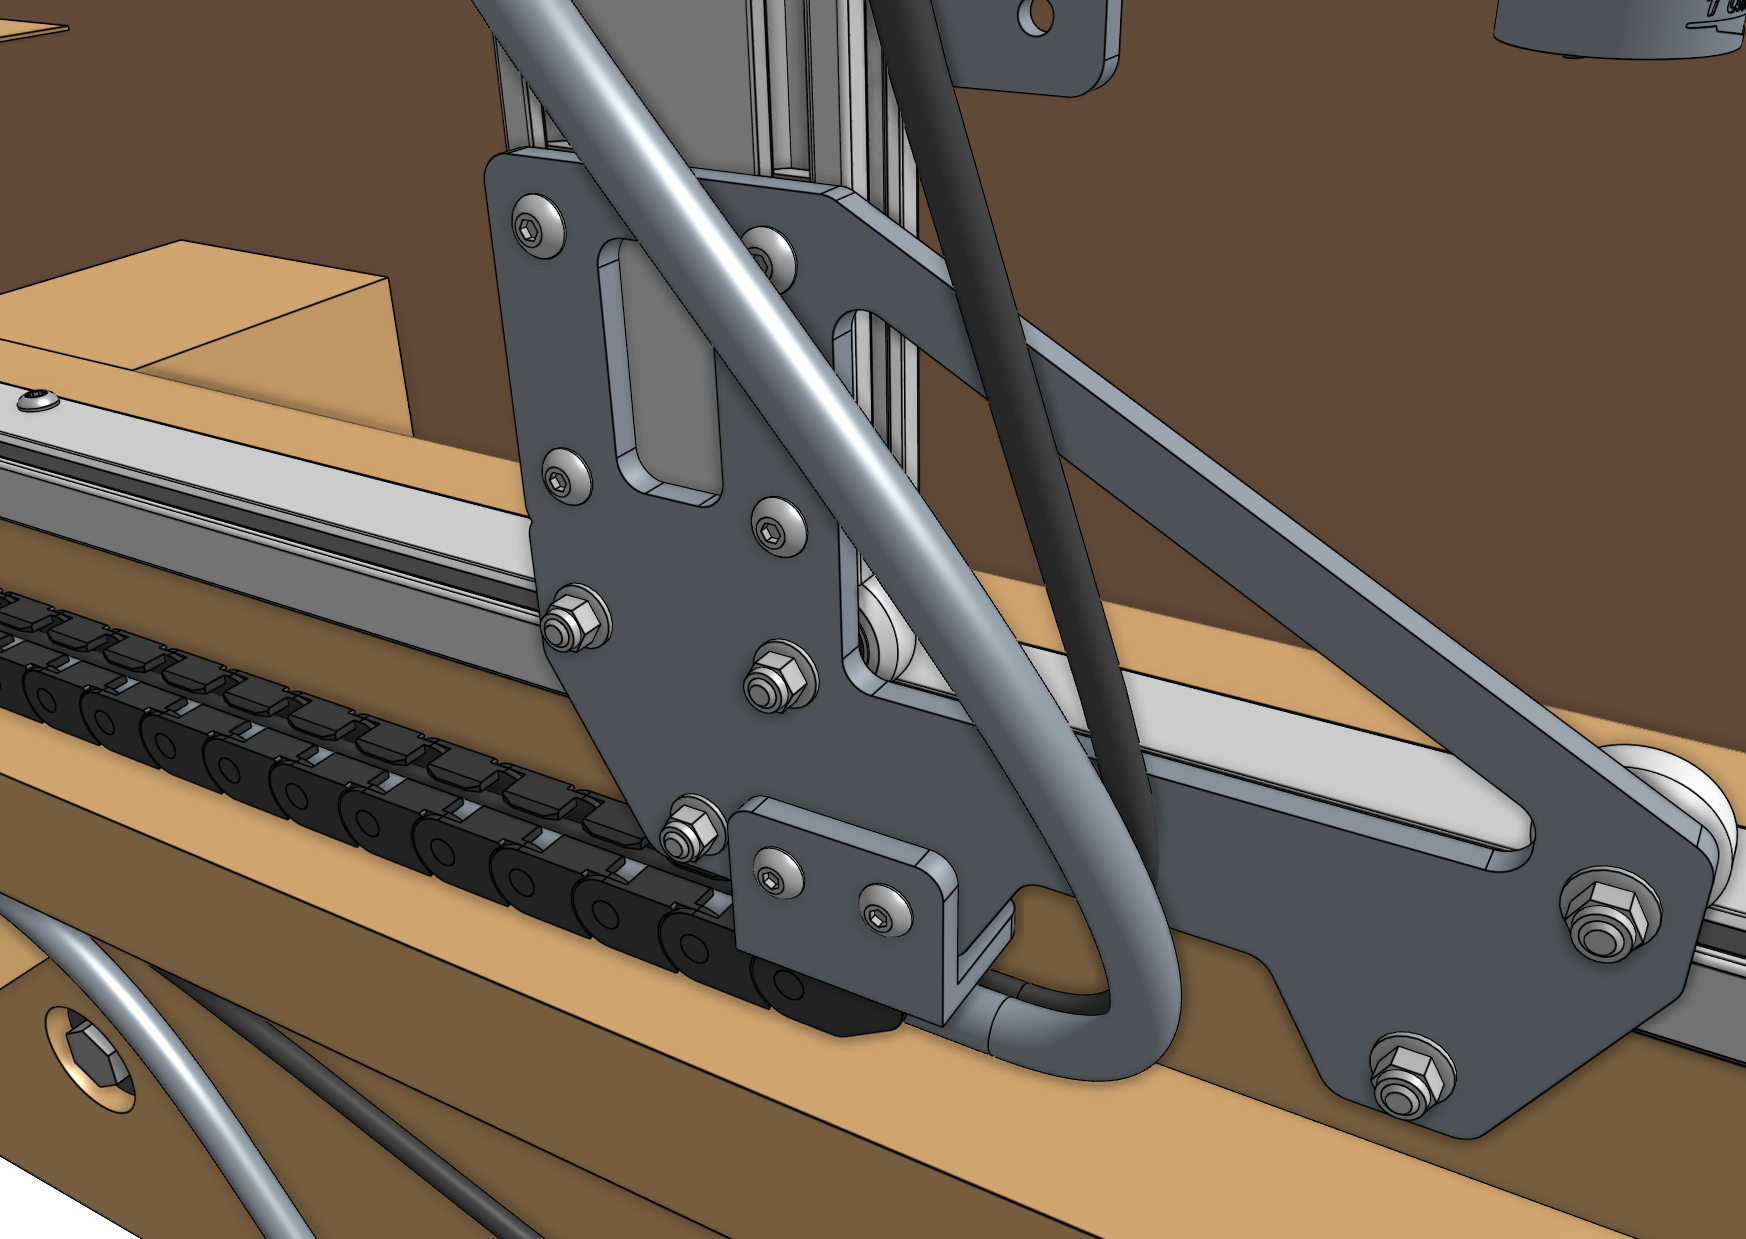 Connect the x-axis cable carrier to the gantry